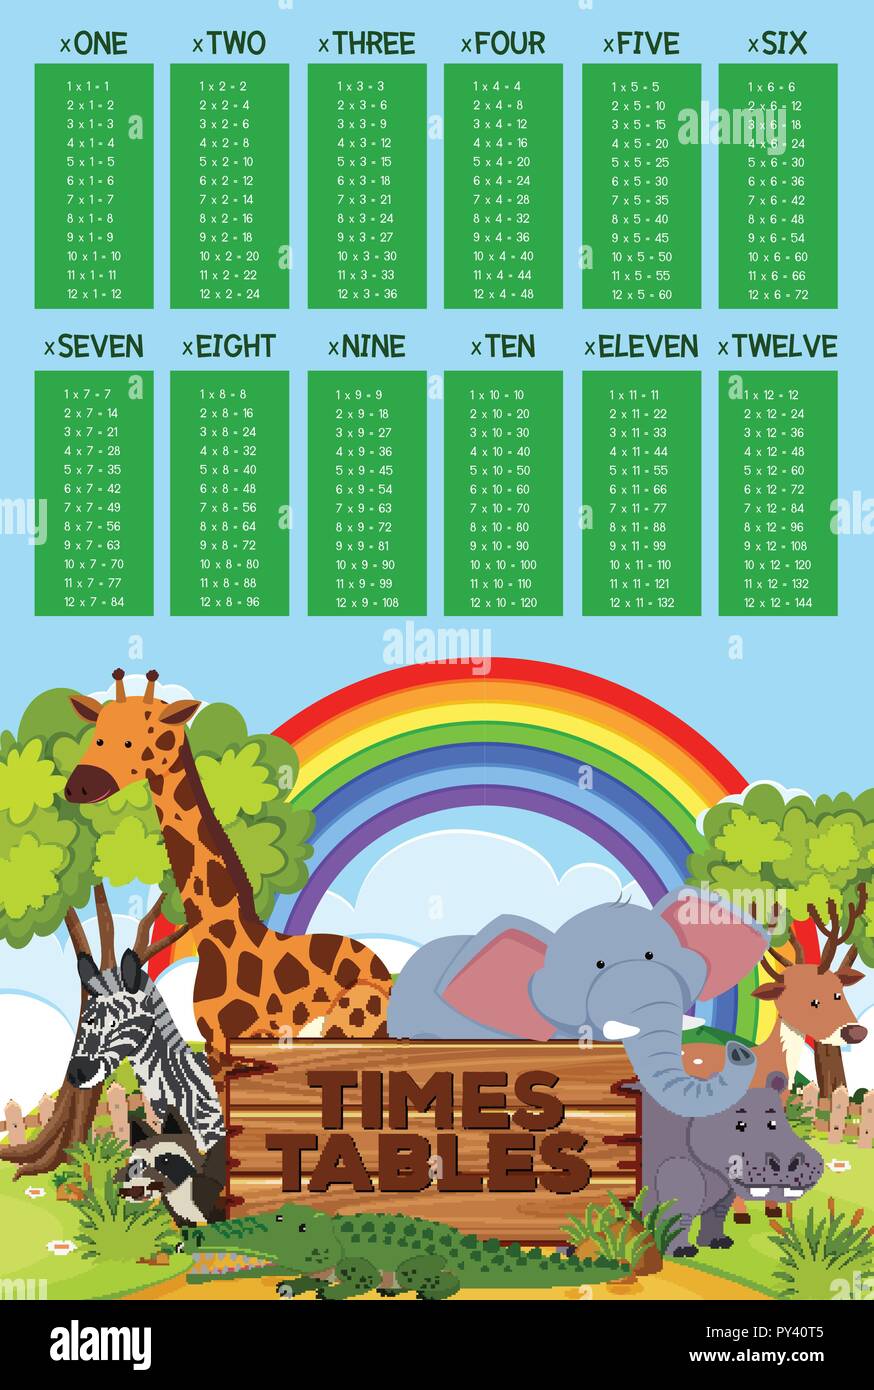 Times table poster with zoo animals illustration Stock Vector